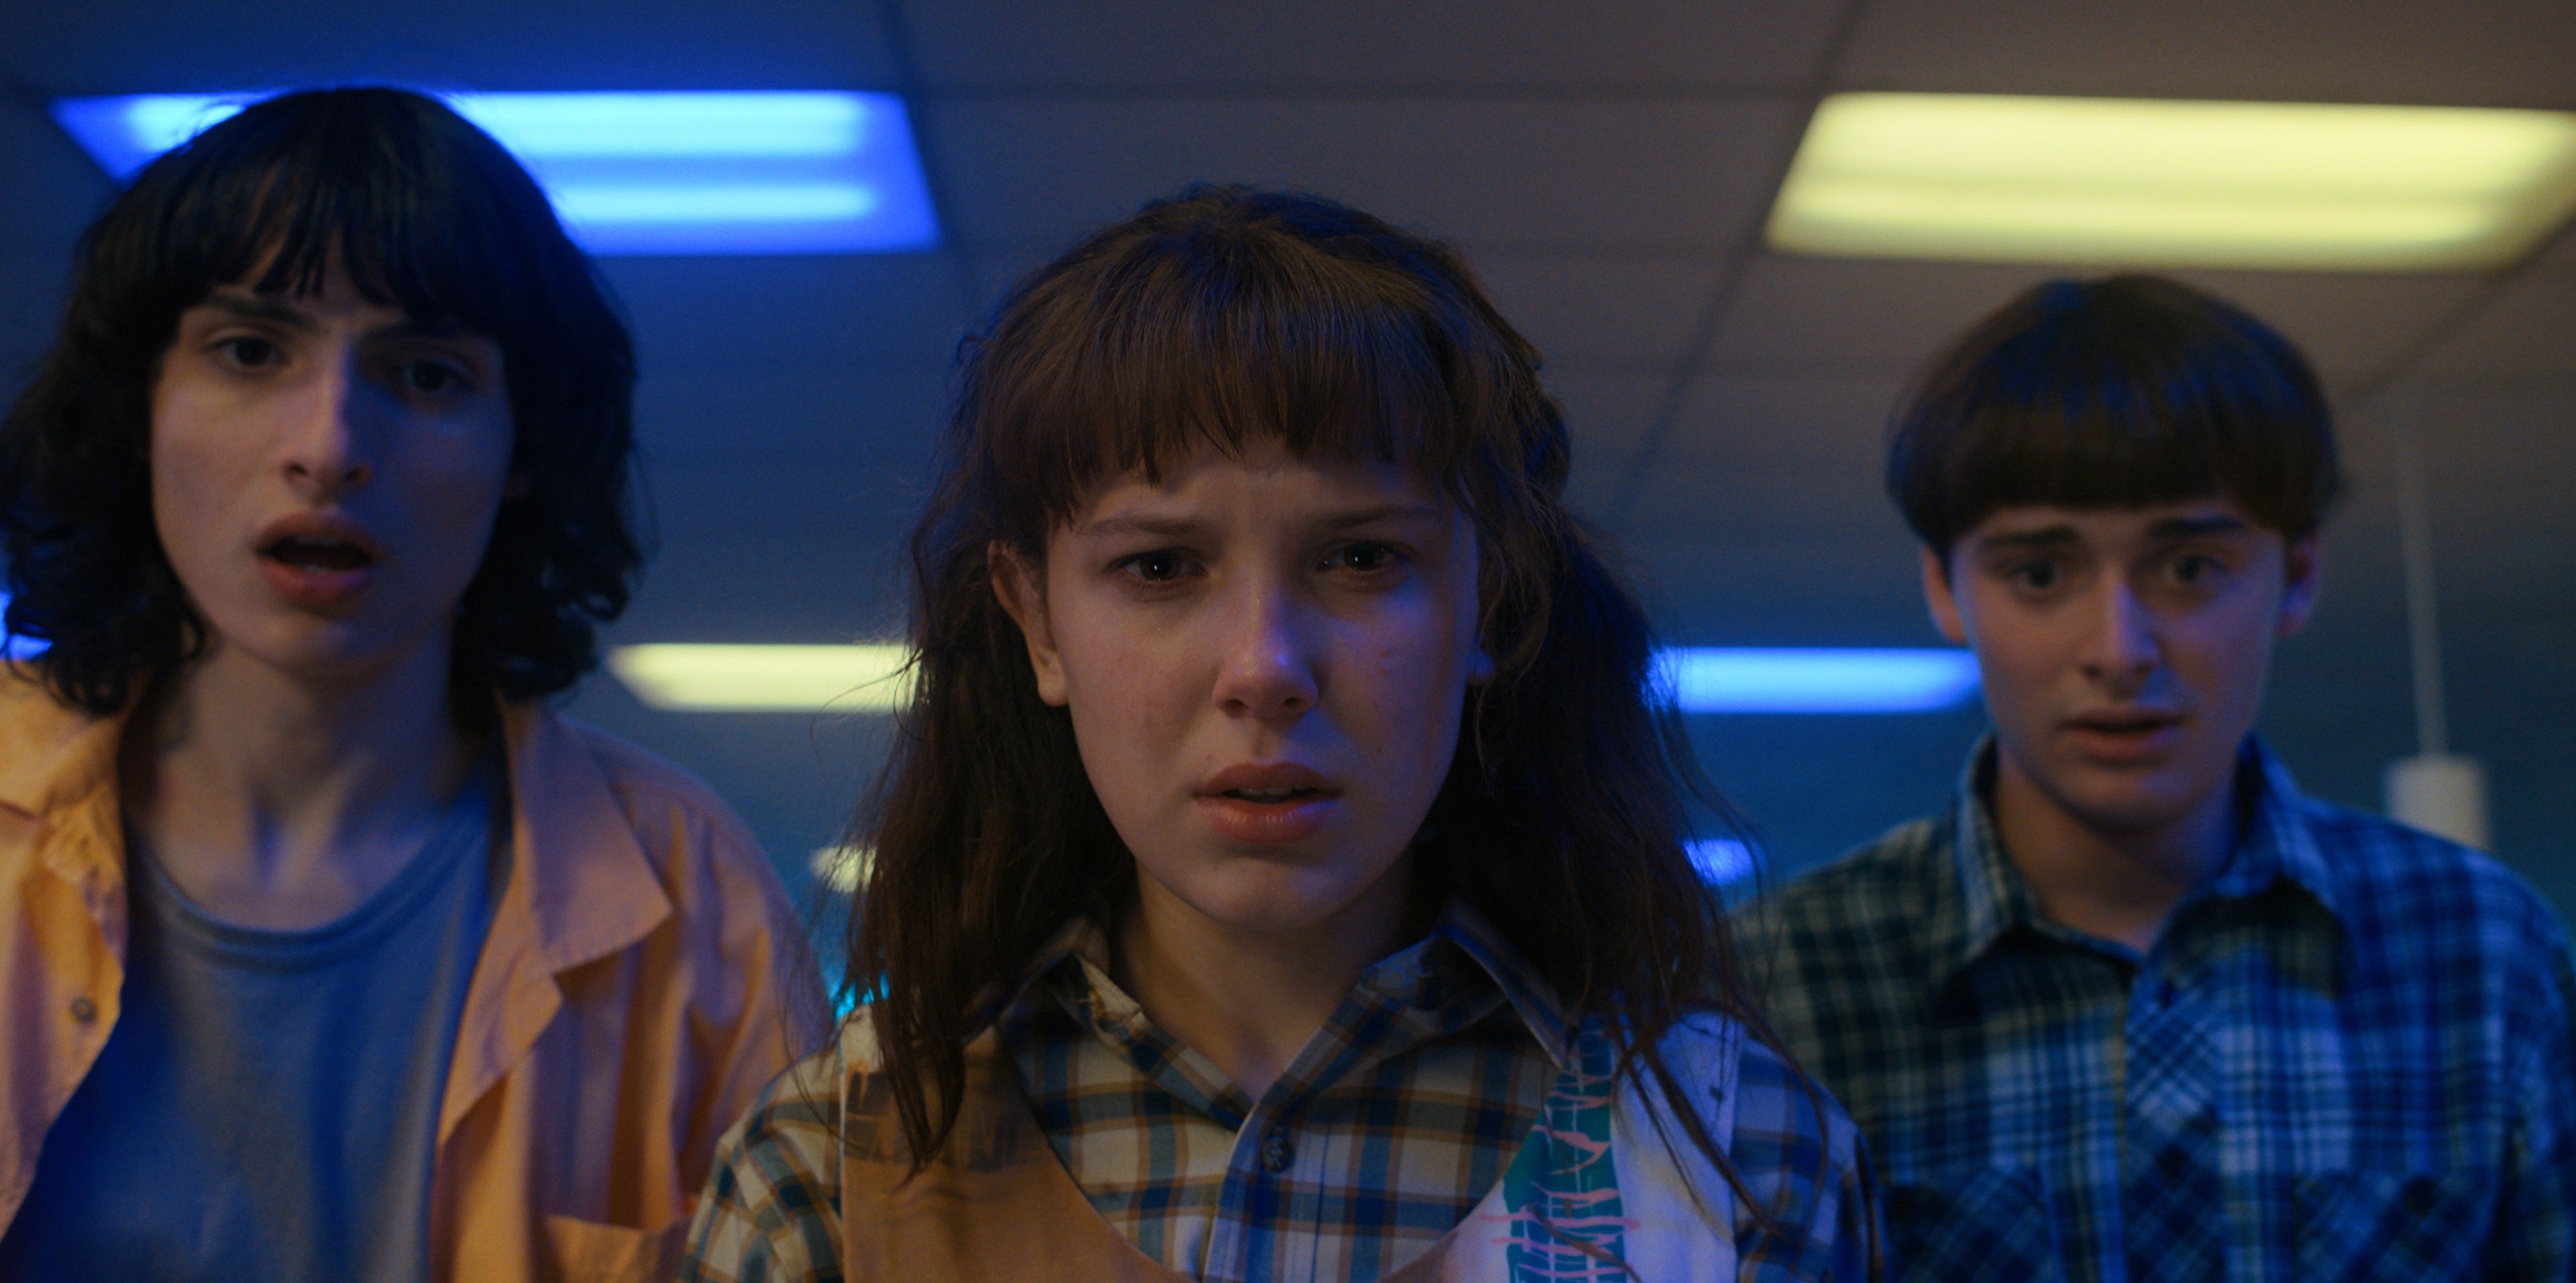 stranger things l to r finn wolfhard as mike wheeler, millie bobby brown as eleven and noah schnapp as will byers in stranger things cr courtesy of netflix  2022